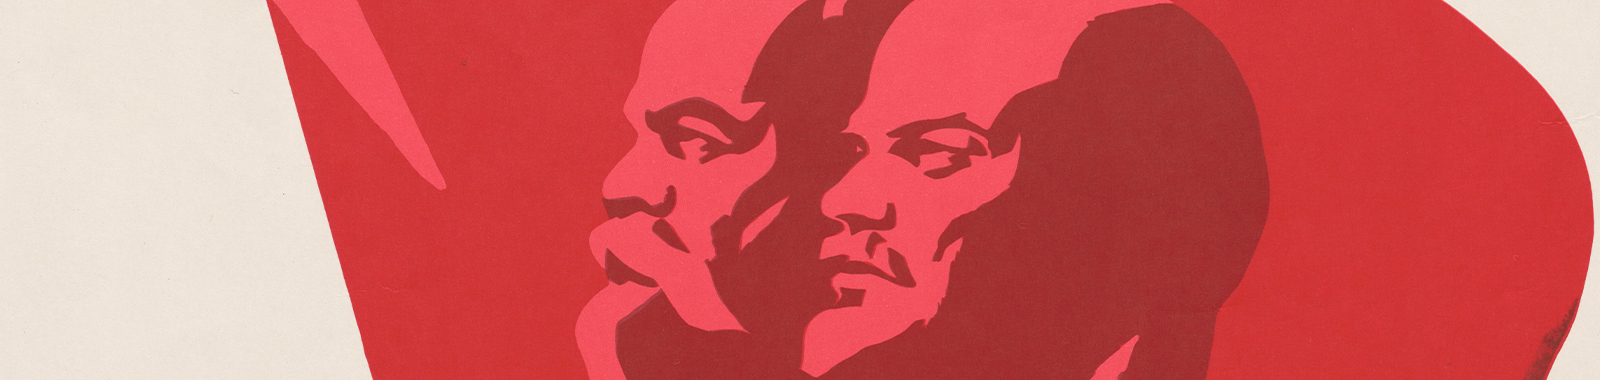 detail of a Russian soviet poster showing Marx and Lenin's profiles on a billowing red flag